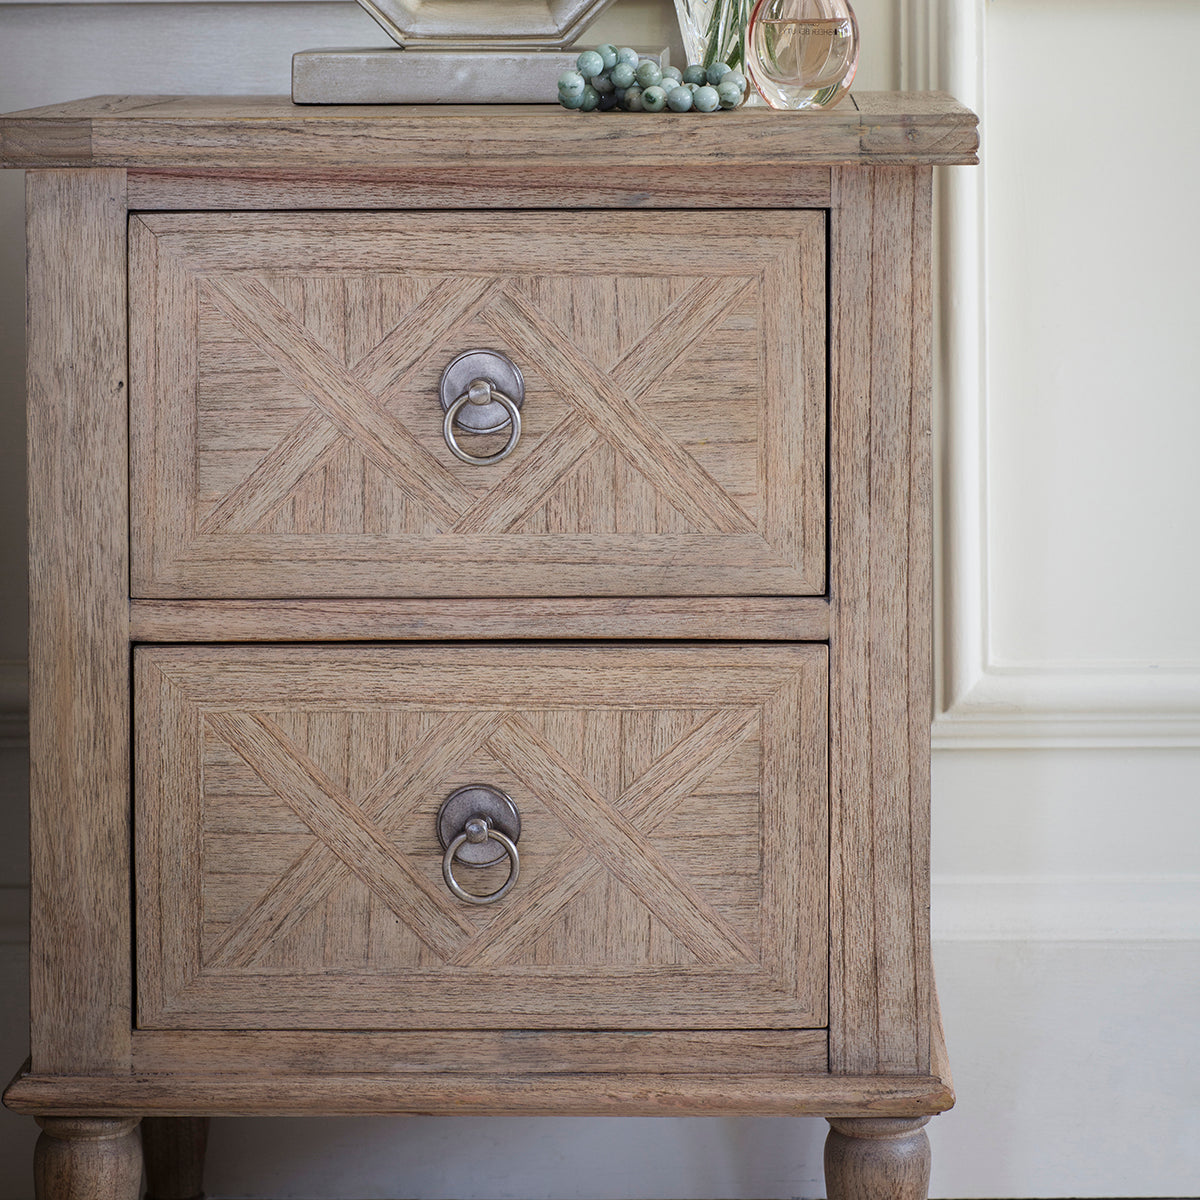 Muscat 2 Drawer Bedside Table